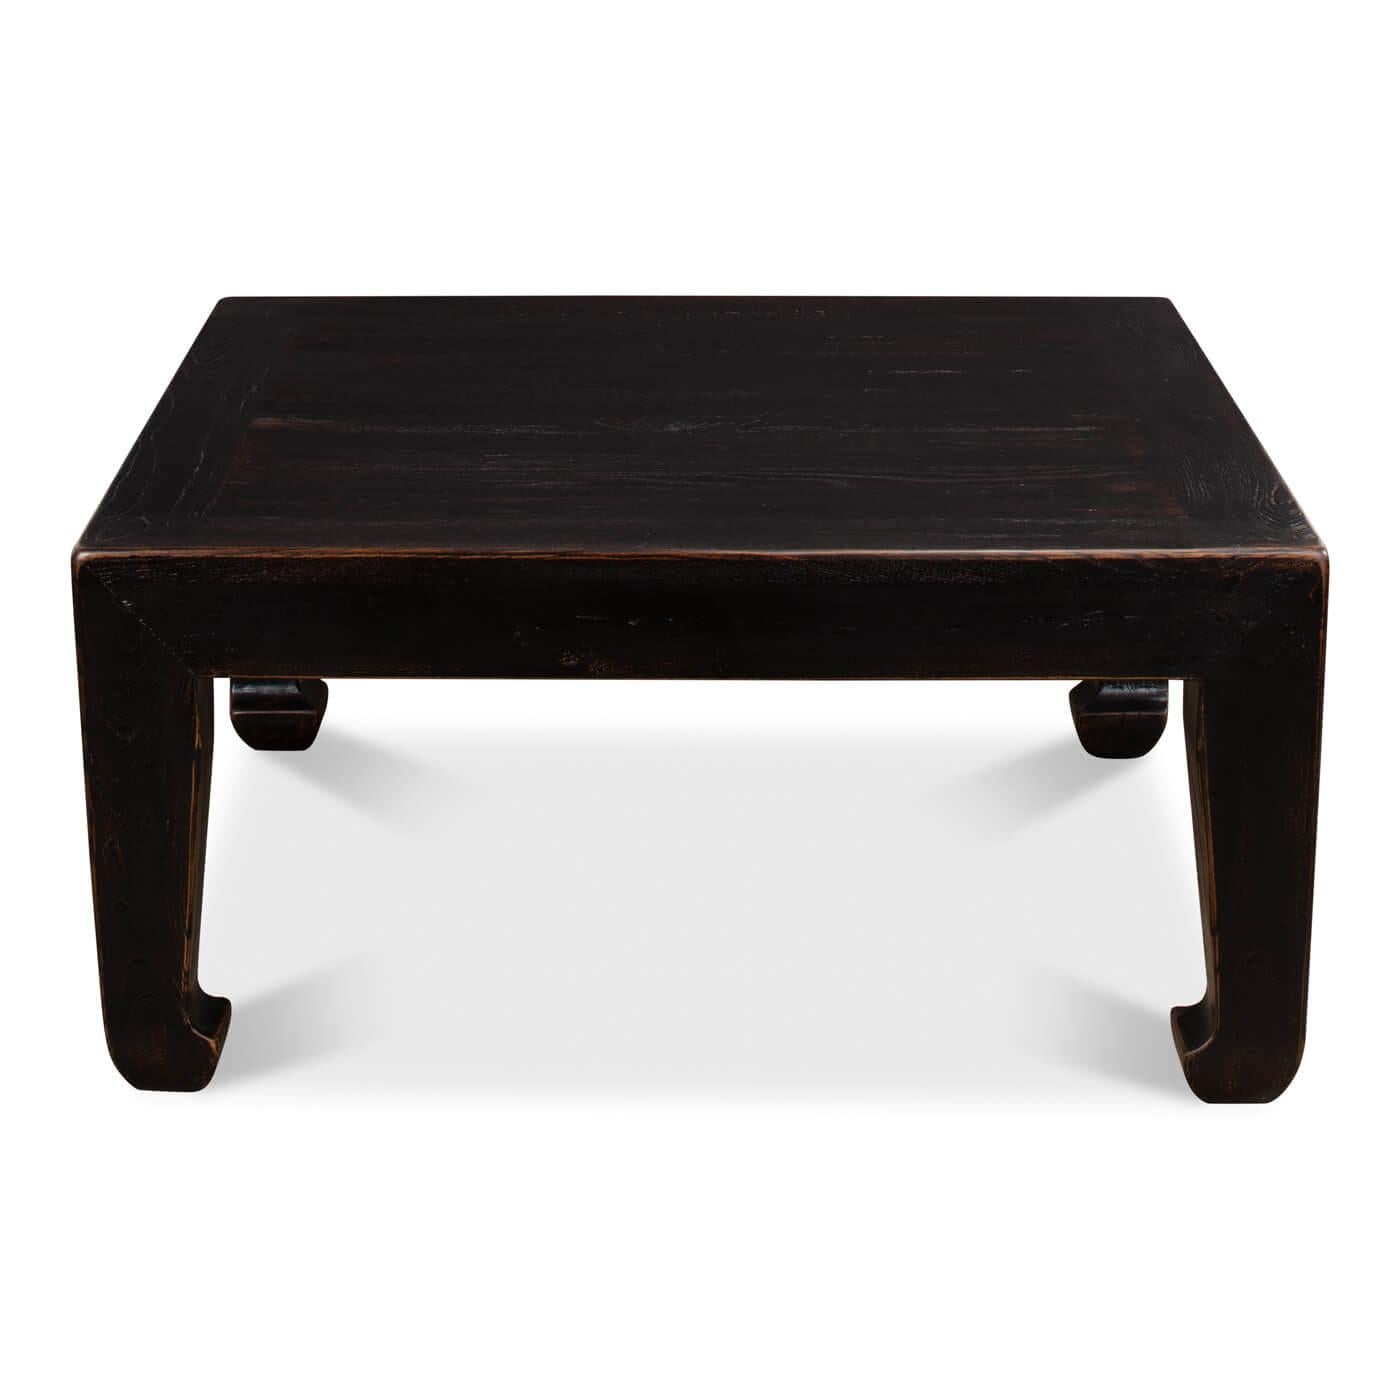 Asian-style ebonized finish square coffee table, a classic style inspired by the far east. This table is a square shape with horse hoof-style legs, a design that dates back to the 14th century. 

Crafted of reclaimed pine in dark ebony finish.